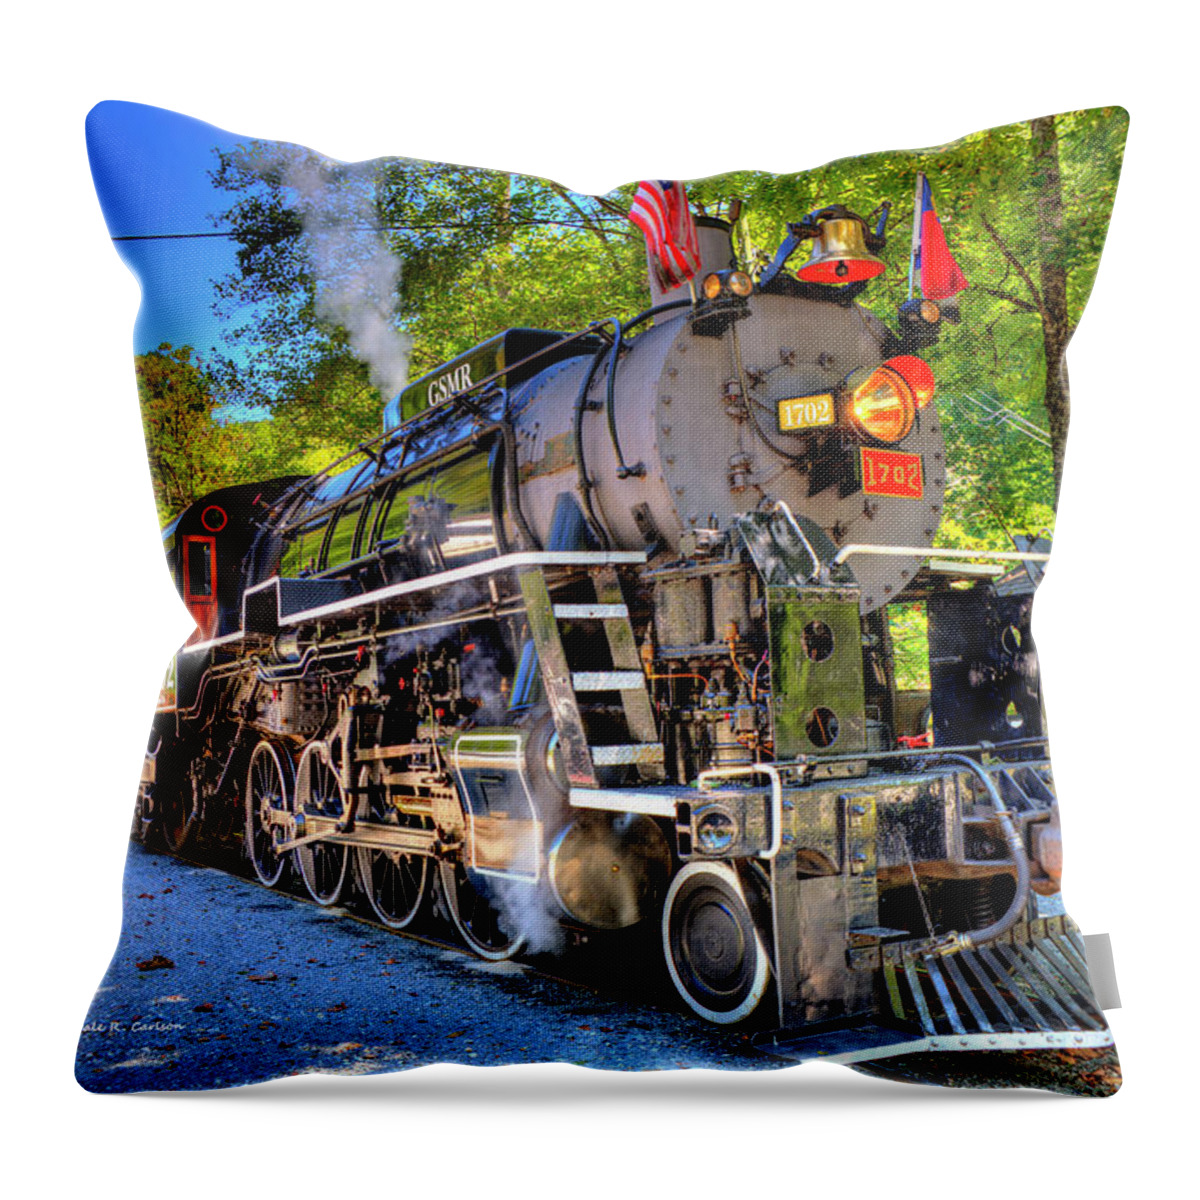 Great Smoky Mountain Railroad Throw Pillow featuring the photograph Locomotive 1702 by Dale R Carlson